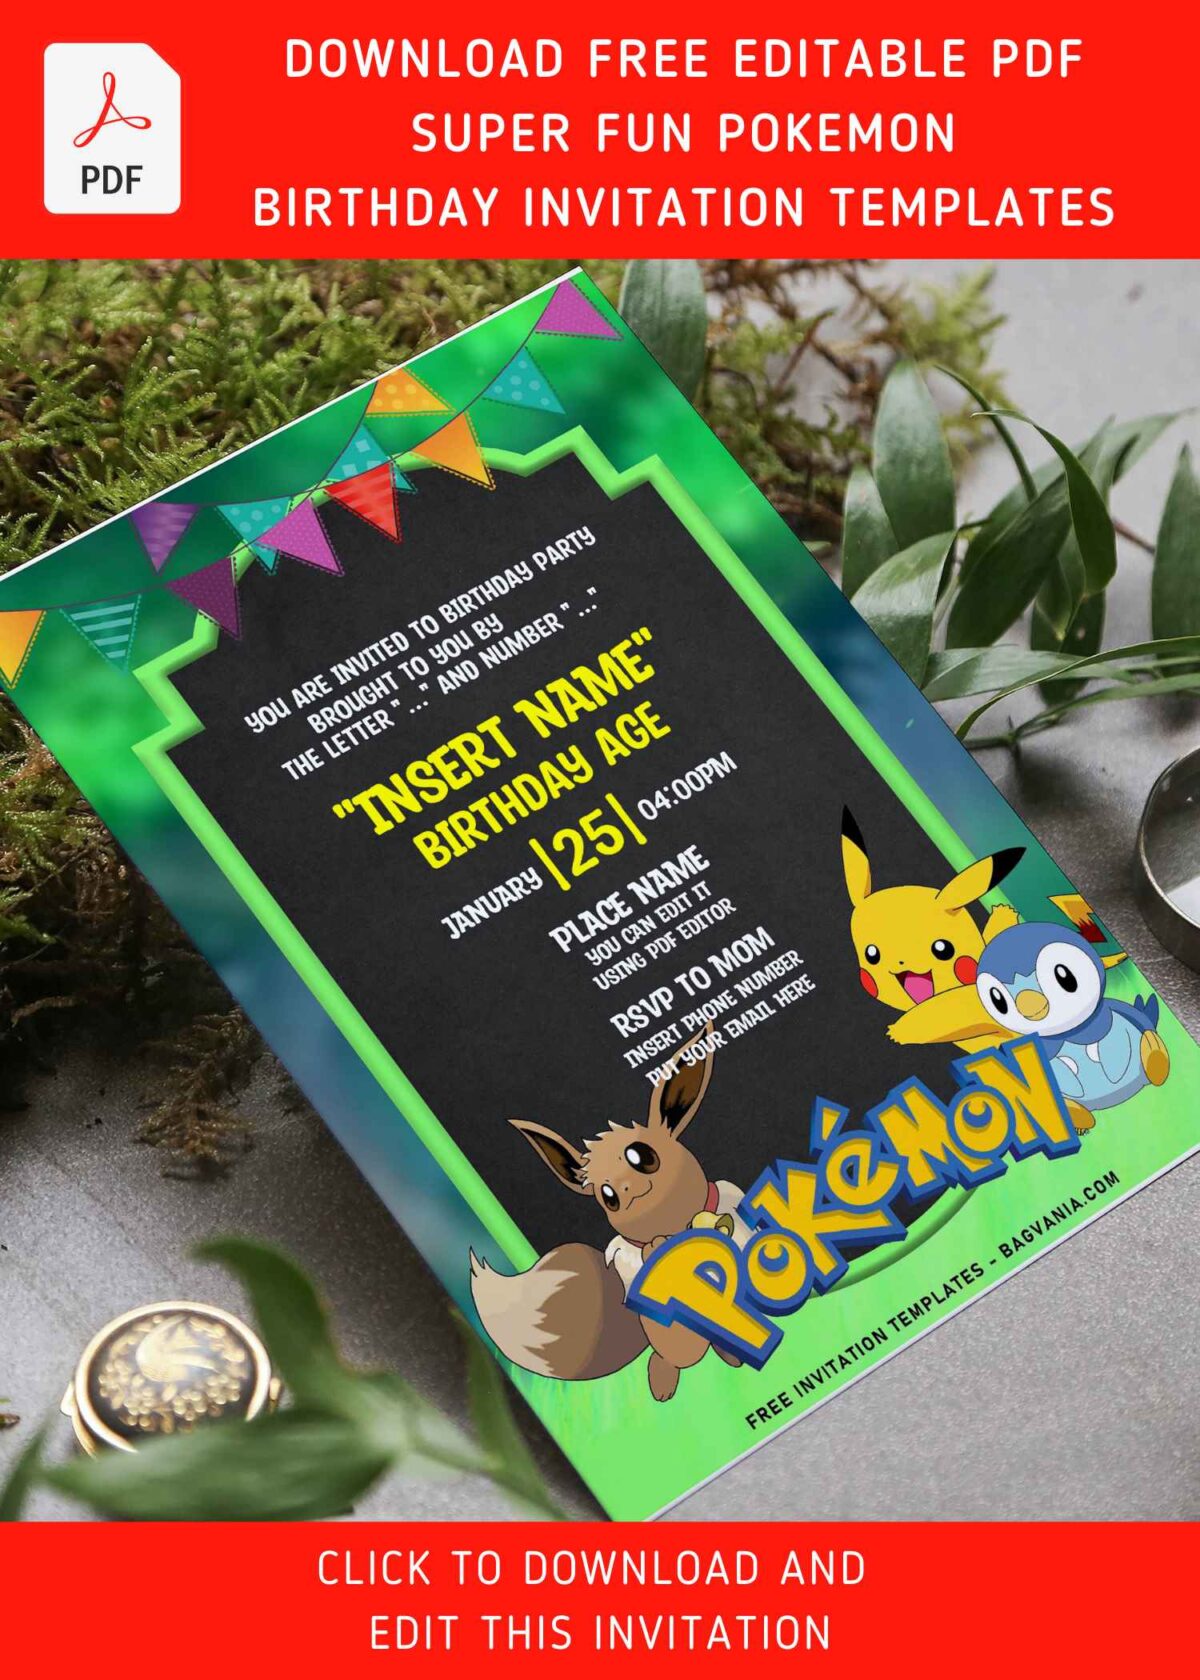 (Free Editable PDF) Hilarious Pikachu And Friends Pokémon Birthday Invitation Templates with adorable Eevee and Piplup